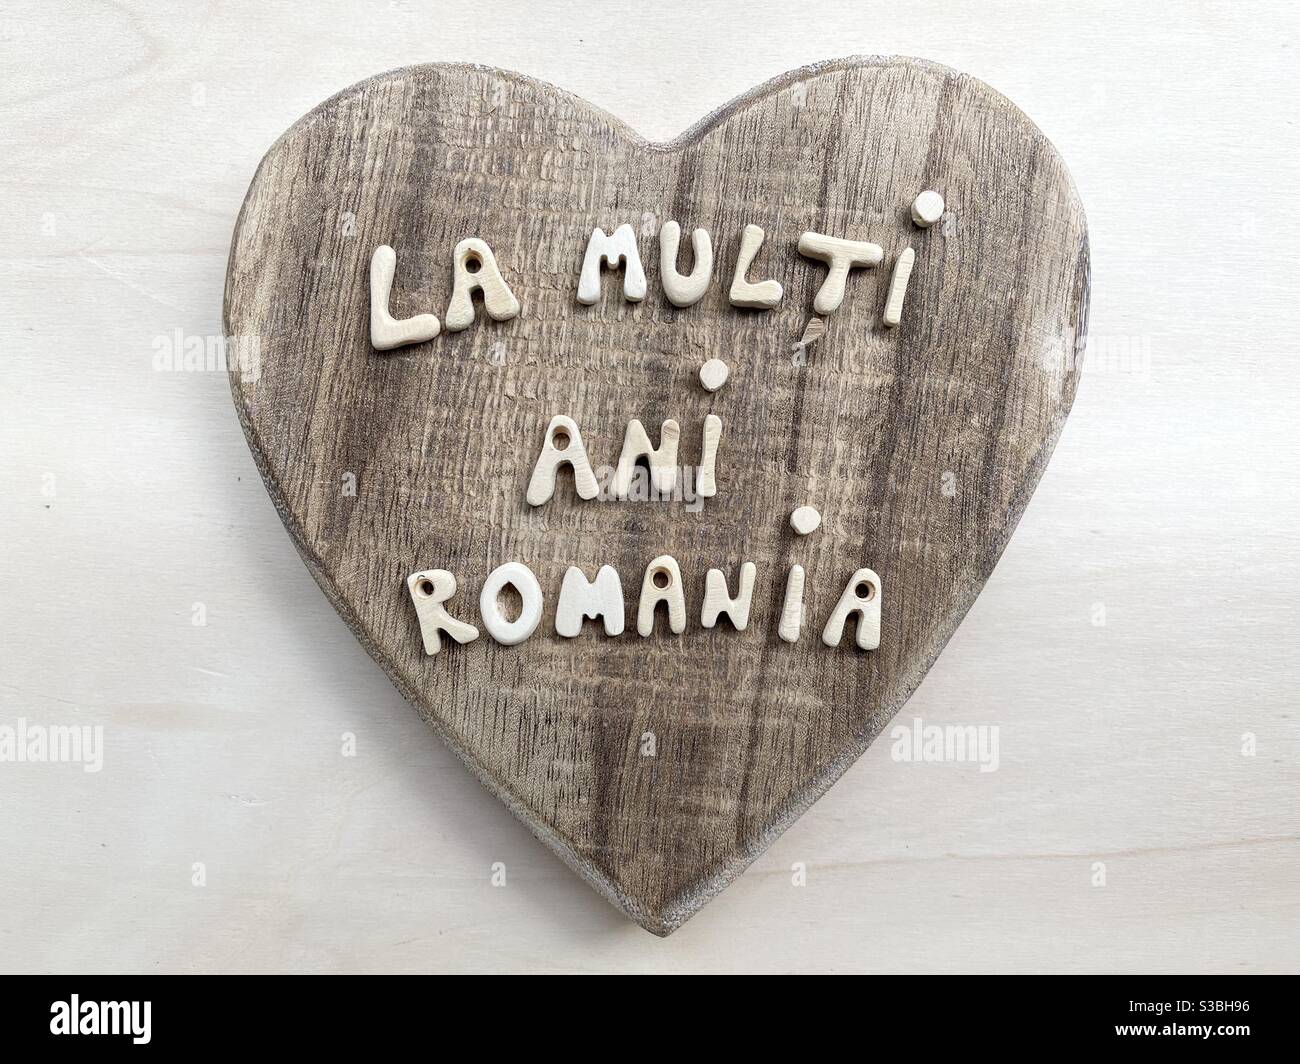 Romania, National Day, creative celebration with wooden letters over a wooden heart Stock Photo